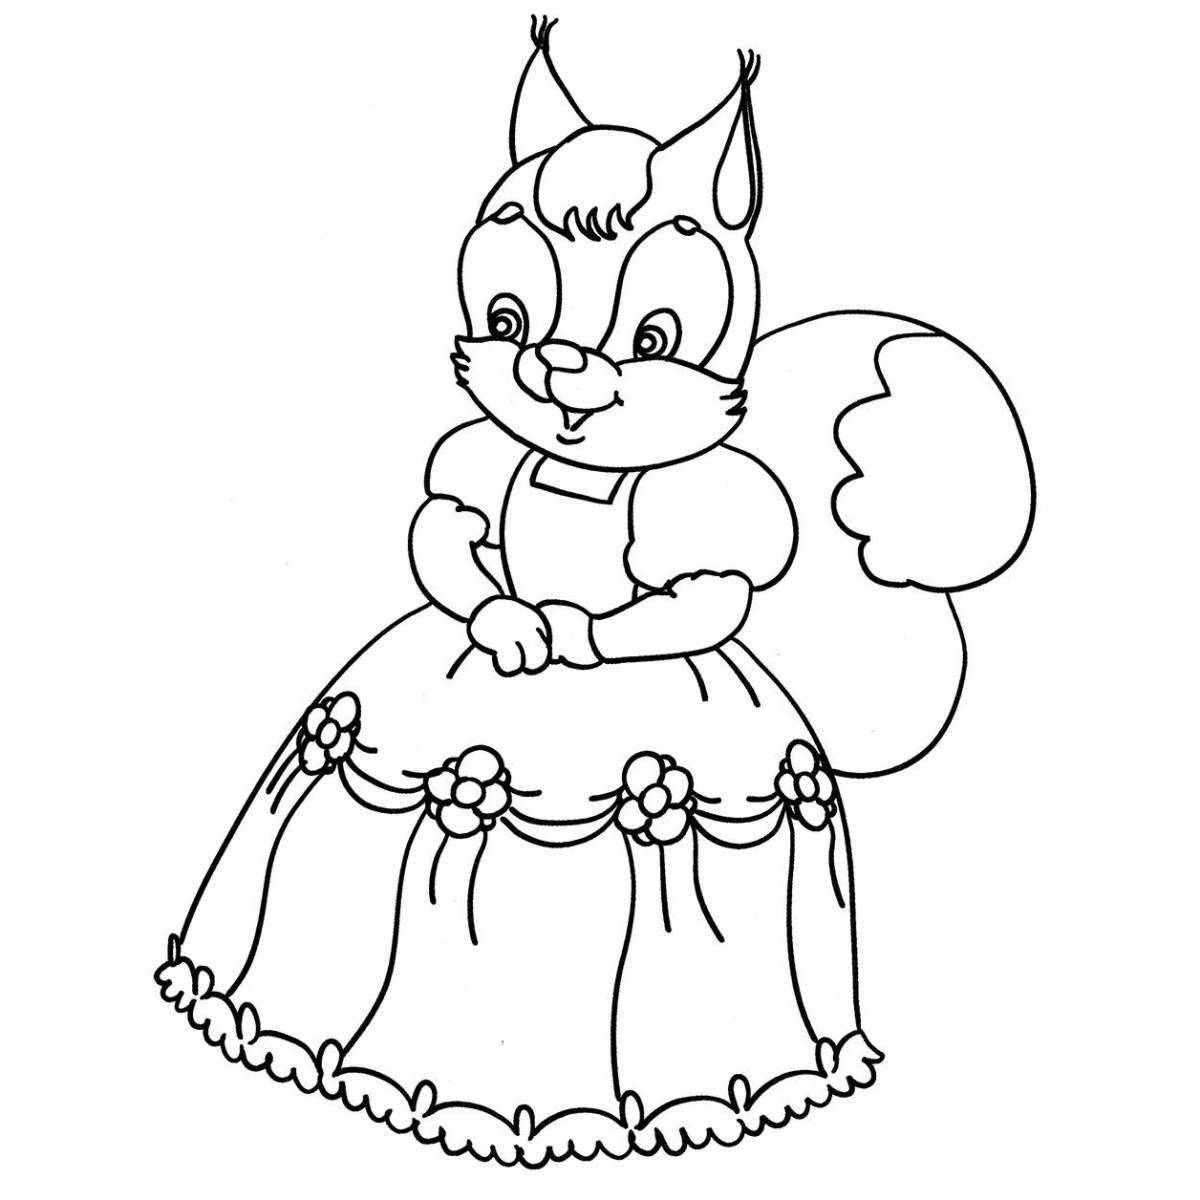 Cute coloring bunny in a dress